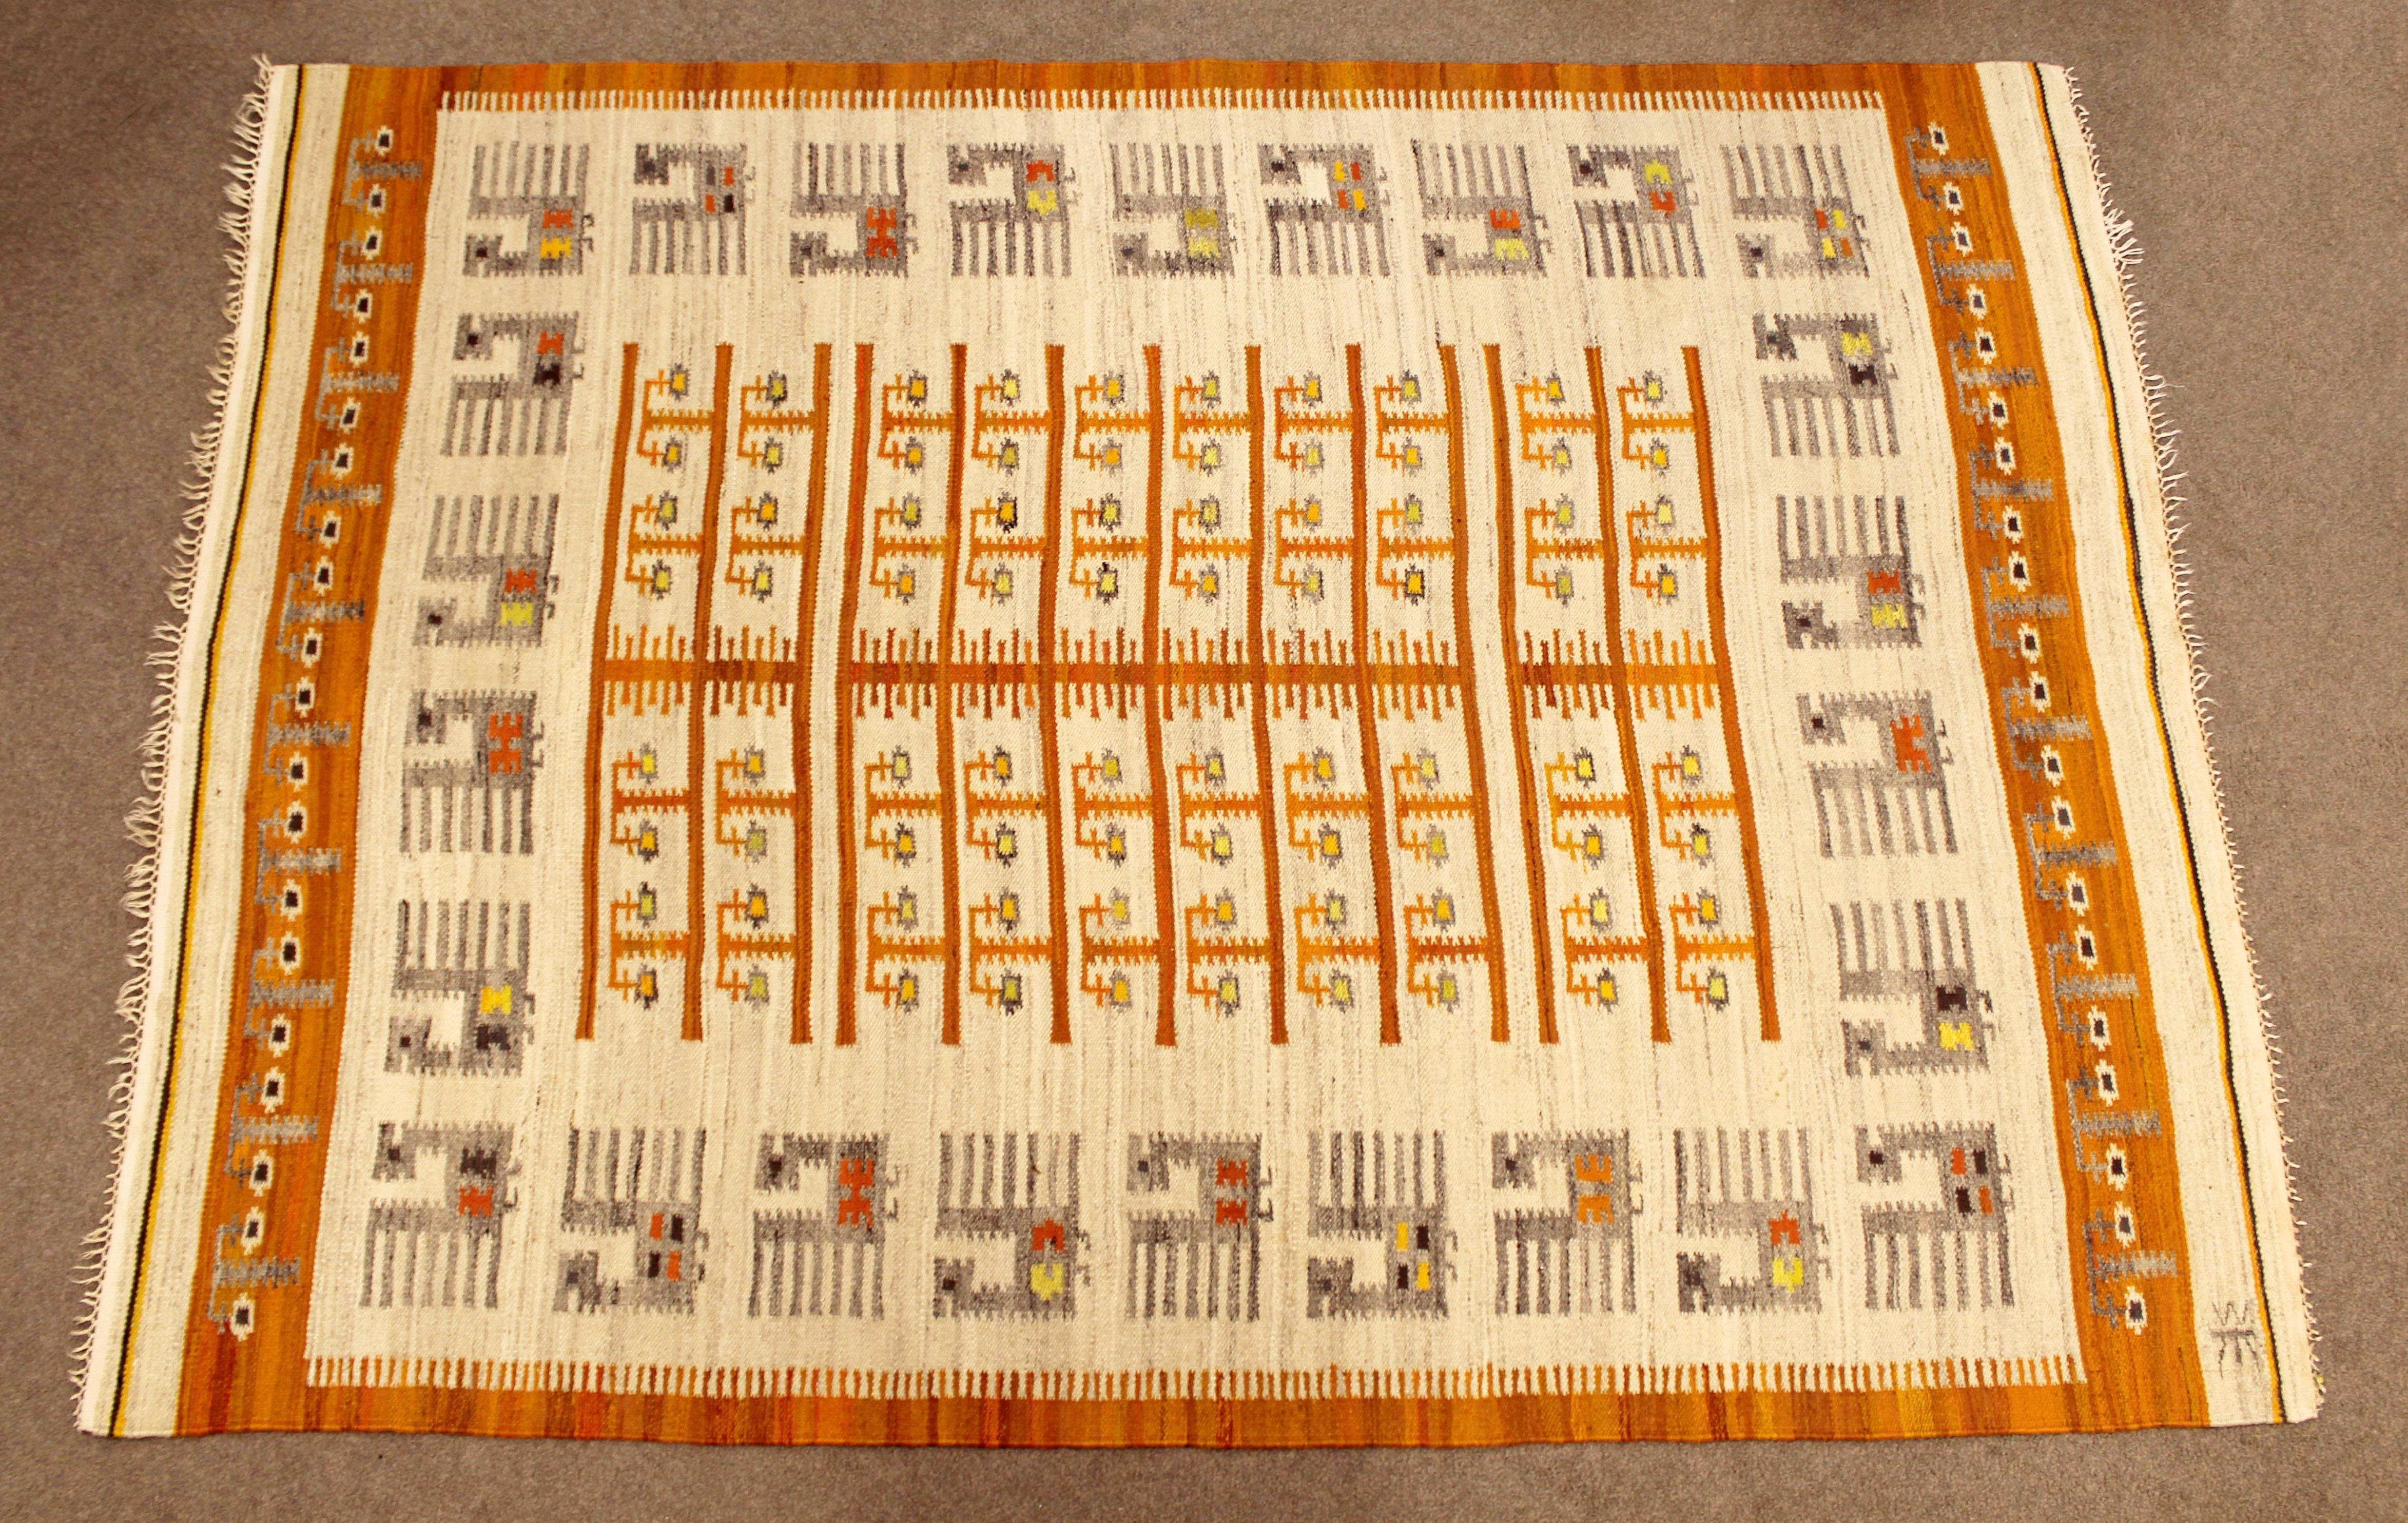 For your consideration is a magnificent, rectangular, flat-weave wool, area rug with an orange pattern, by the Polish company Wanda Krakow, circa the 1960s. In very good condition. The dimensions are 64